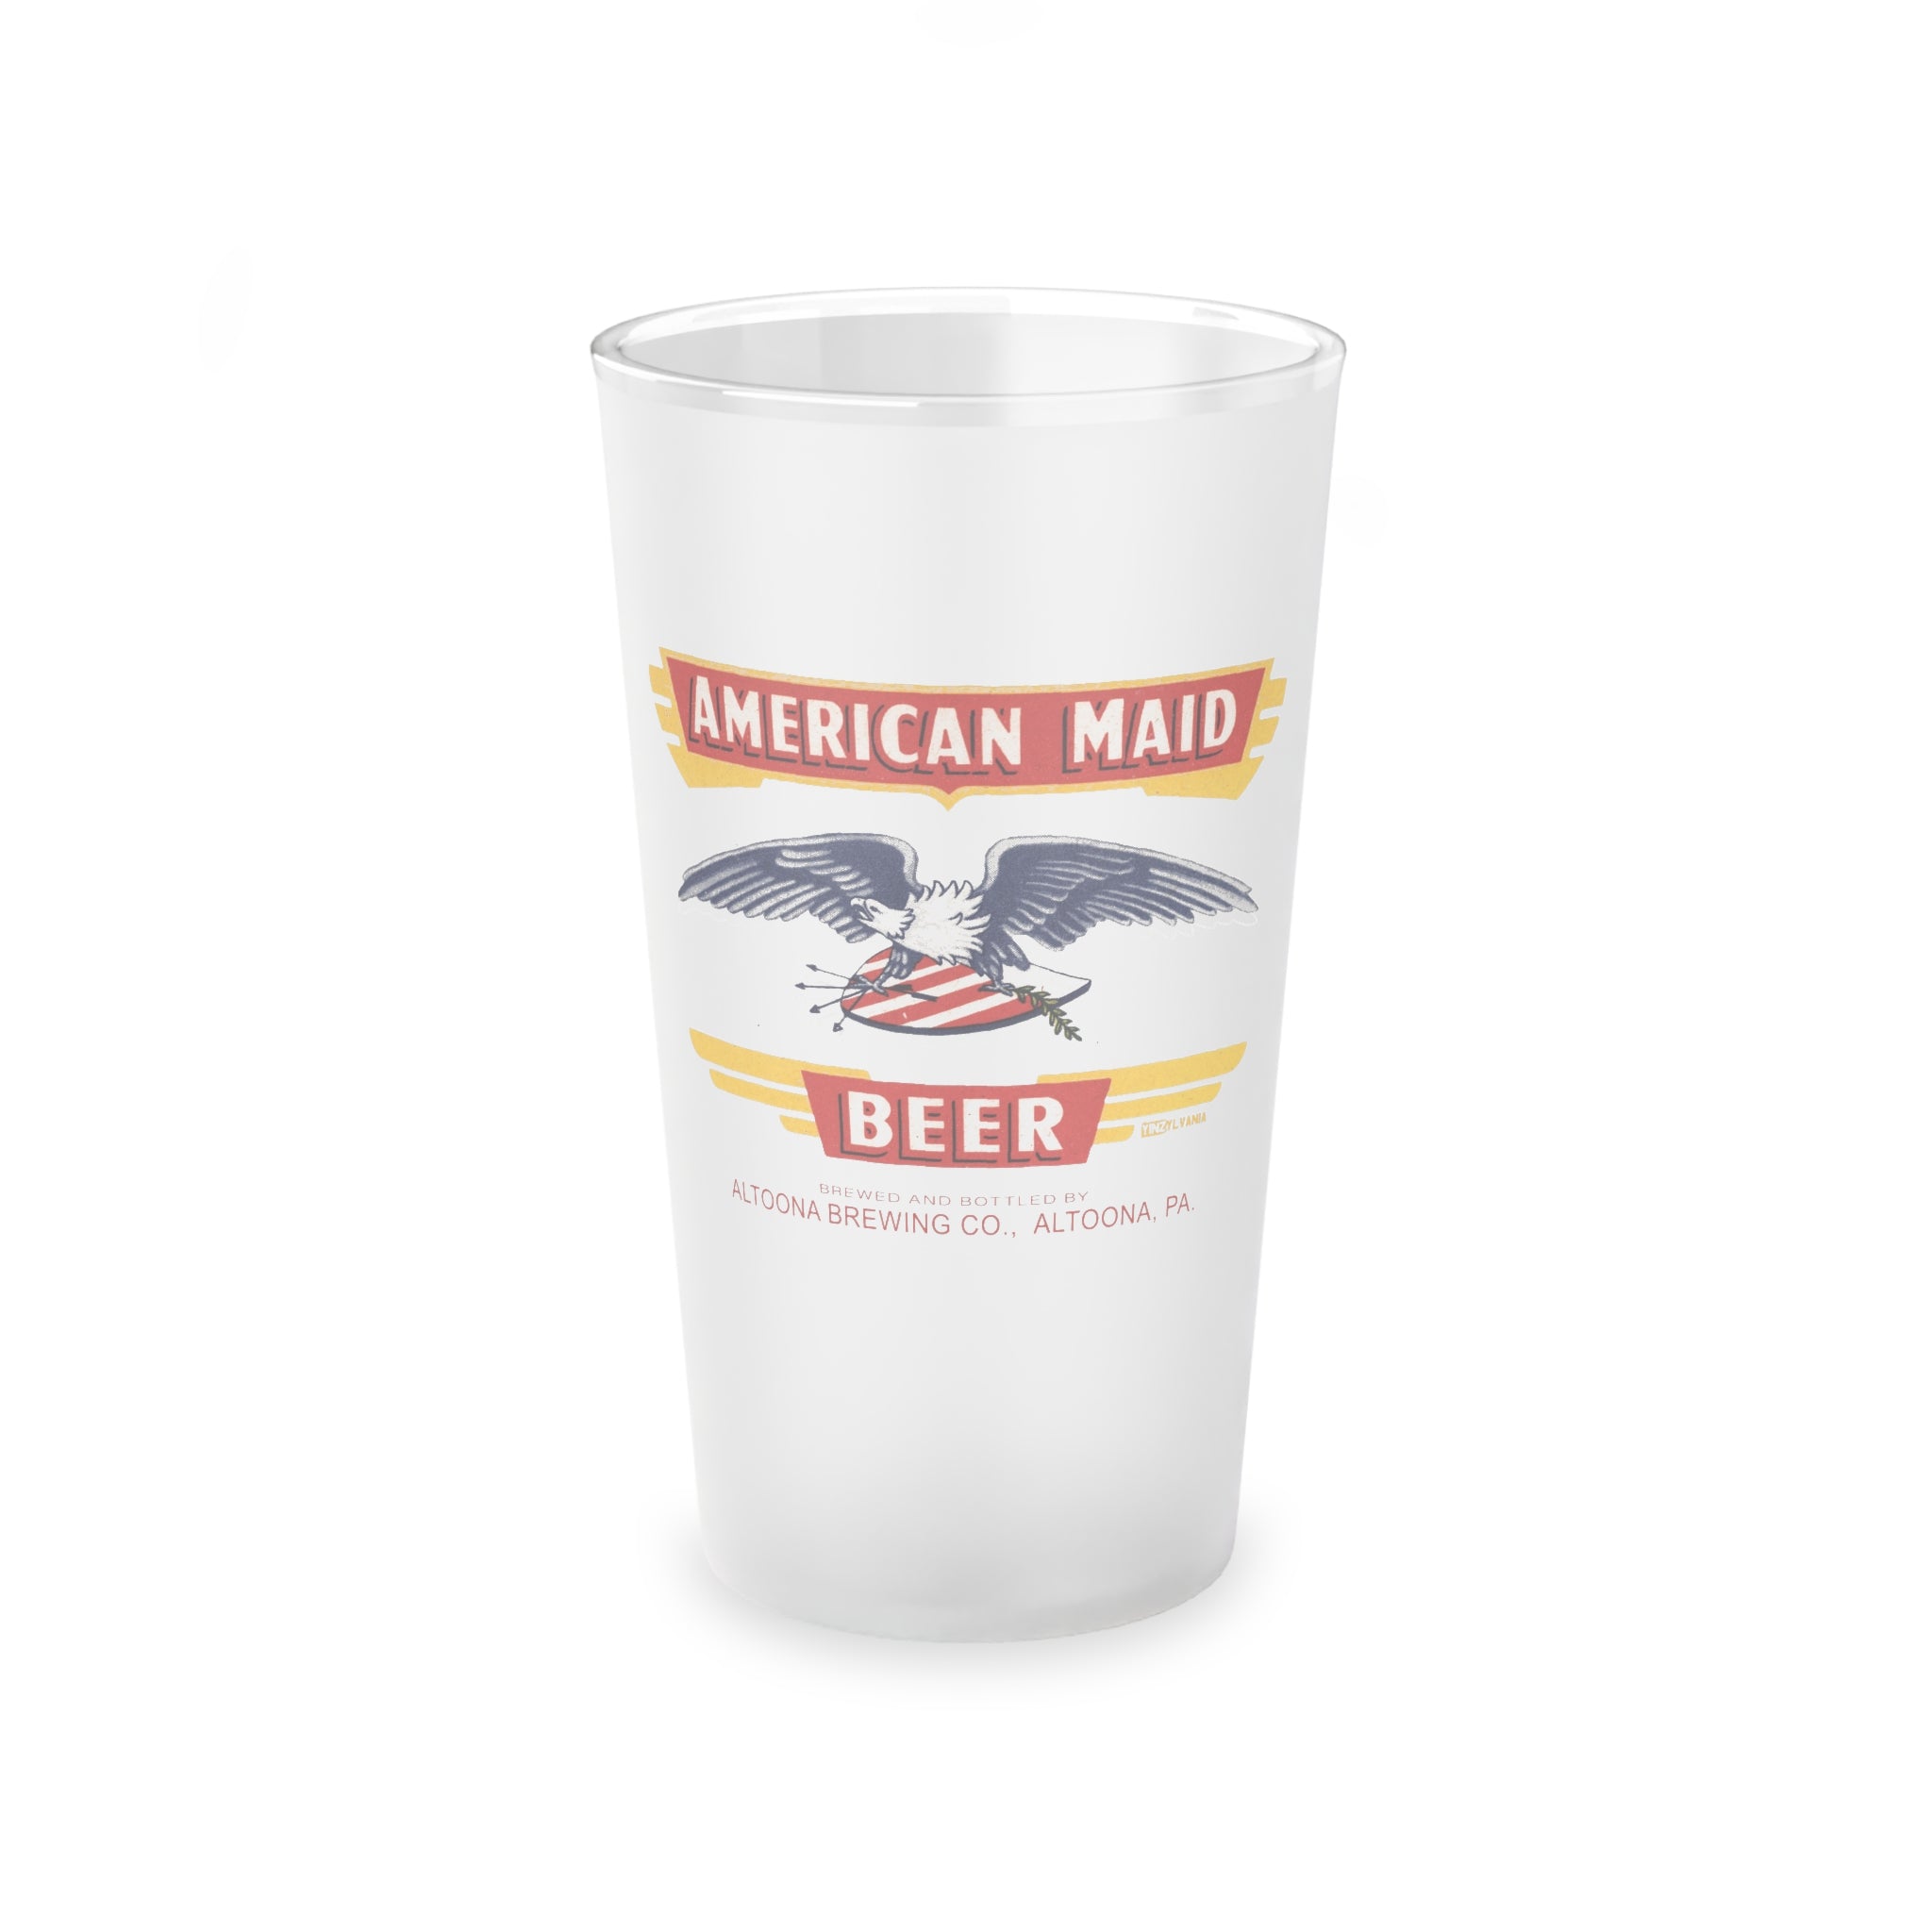 AMERICAN MAID BEER - Altoona Brewing Company - Frosted Pint Glass, 16oz - Yinzylvania